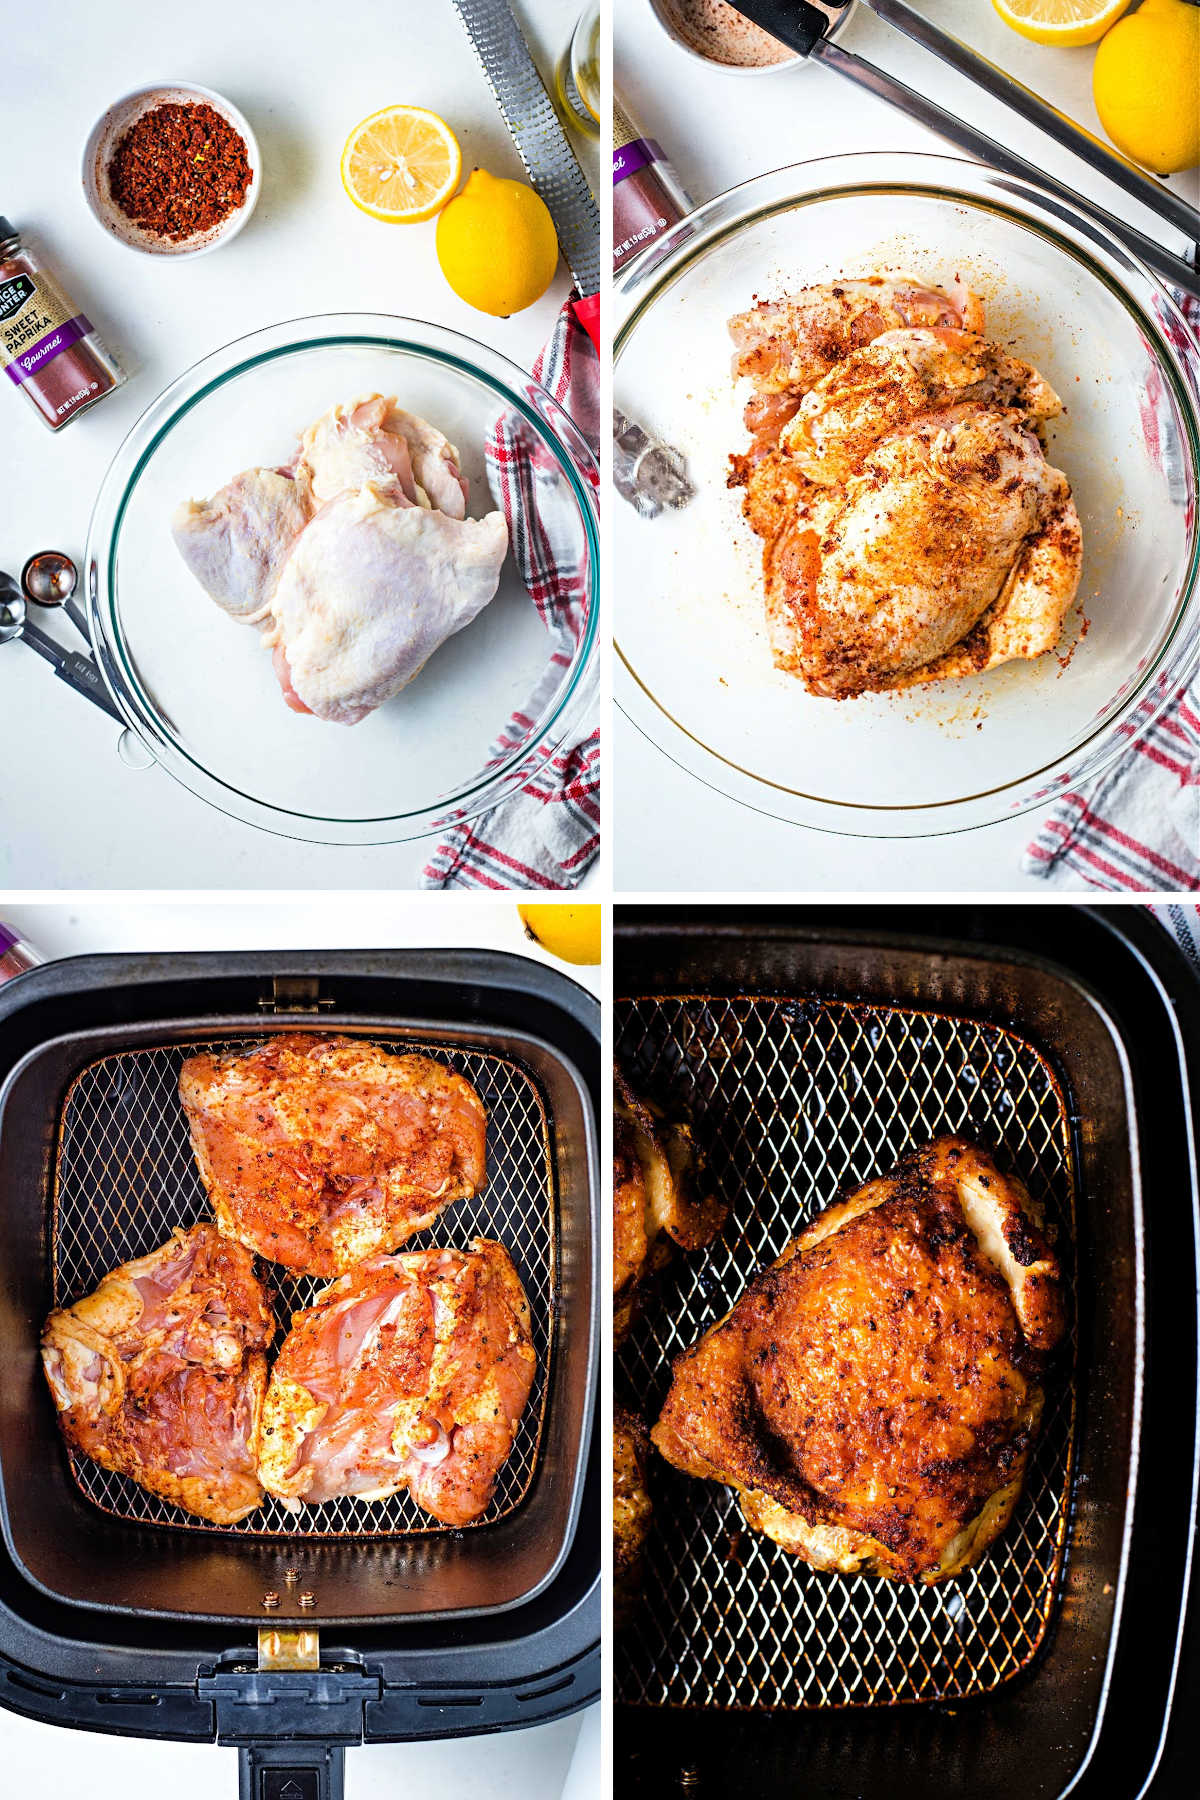 process steps for making air fryer chicken thighs: make a spice rub; coat chicken; place skin side down in air fryer basket; flip and cook until crispy.